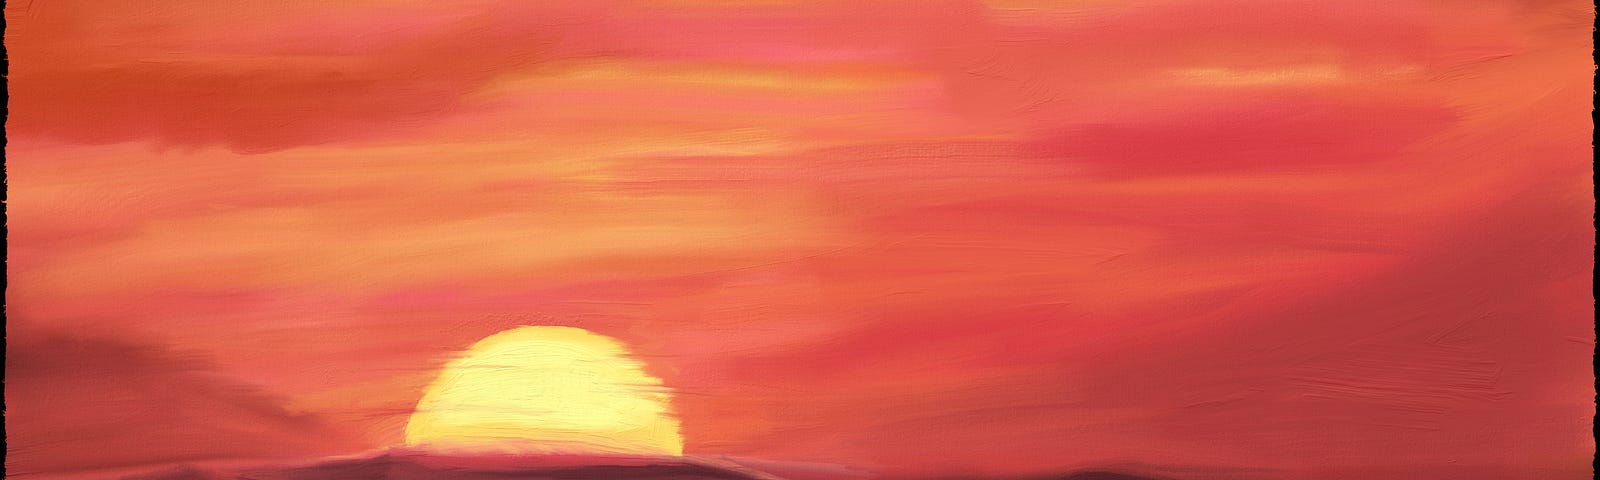 Digital impressionist oil painting of a sunset over rolling hills and farmland in oranges, pinks, yellows, and browns.